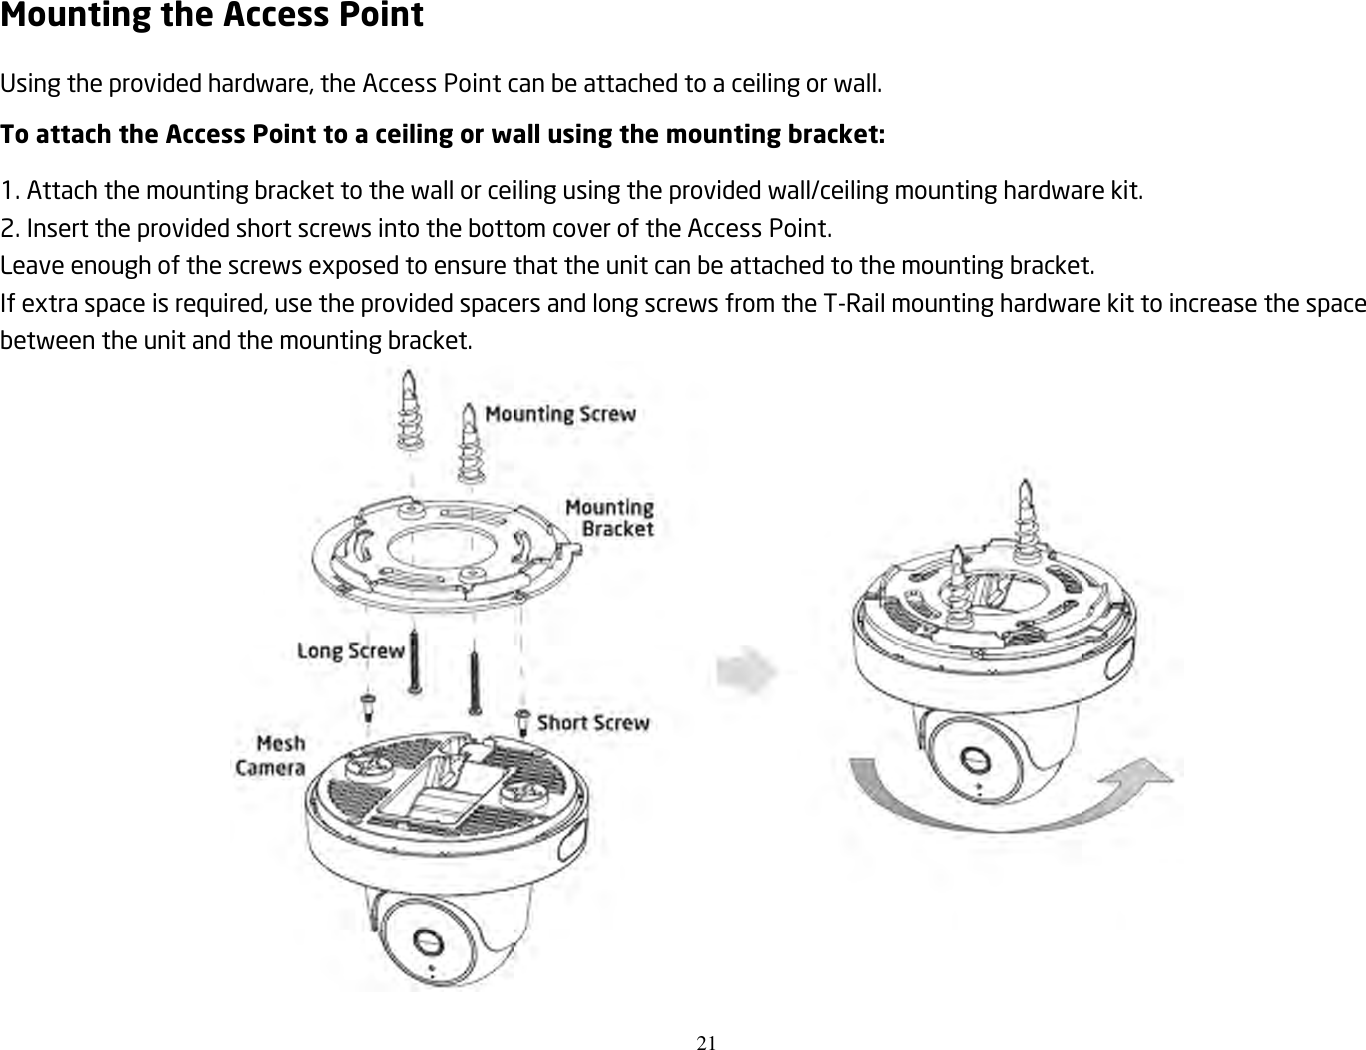 21  Mounting the Access Point Using the provided hardware, the Access Point can be attached to a ceiling or wall. To attach the Access Point to a ceiling or wall using the mounting bracket: 1. Attach the mounting bracket to the wall or ceiling using the provided wall/ceiling mounting hardware kit. 2. Insert the provided short screws into the bottom cover of the Access Point. Leave enough of the screws exposed to ensure that the unit can be attached to the mounting bracket. If extra space is required, use the provided spacers and long screws from the T-Rail mounting hardware kit to increase the space between the unit and the mounting bracket.  